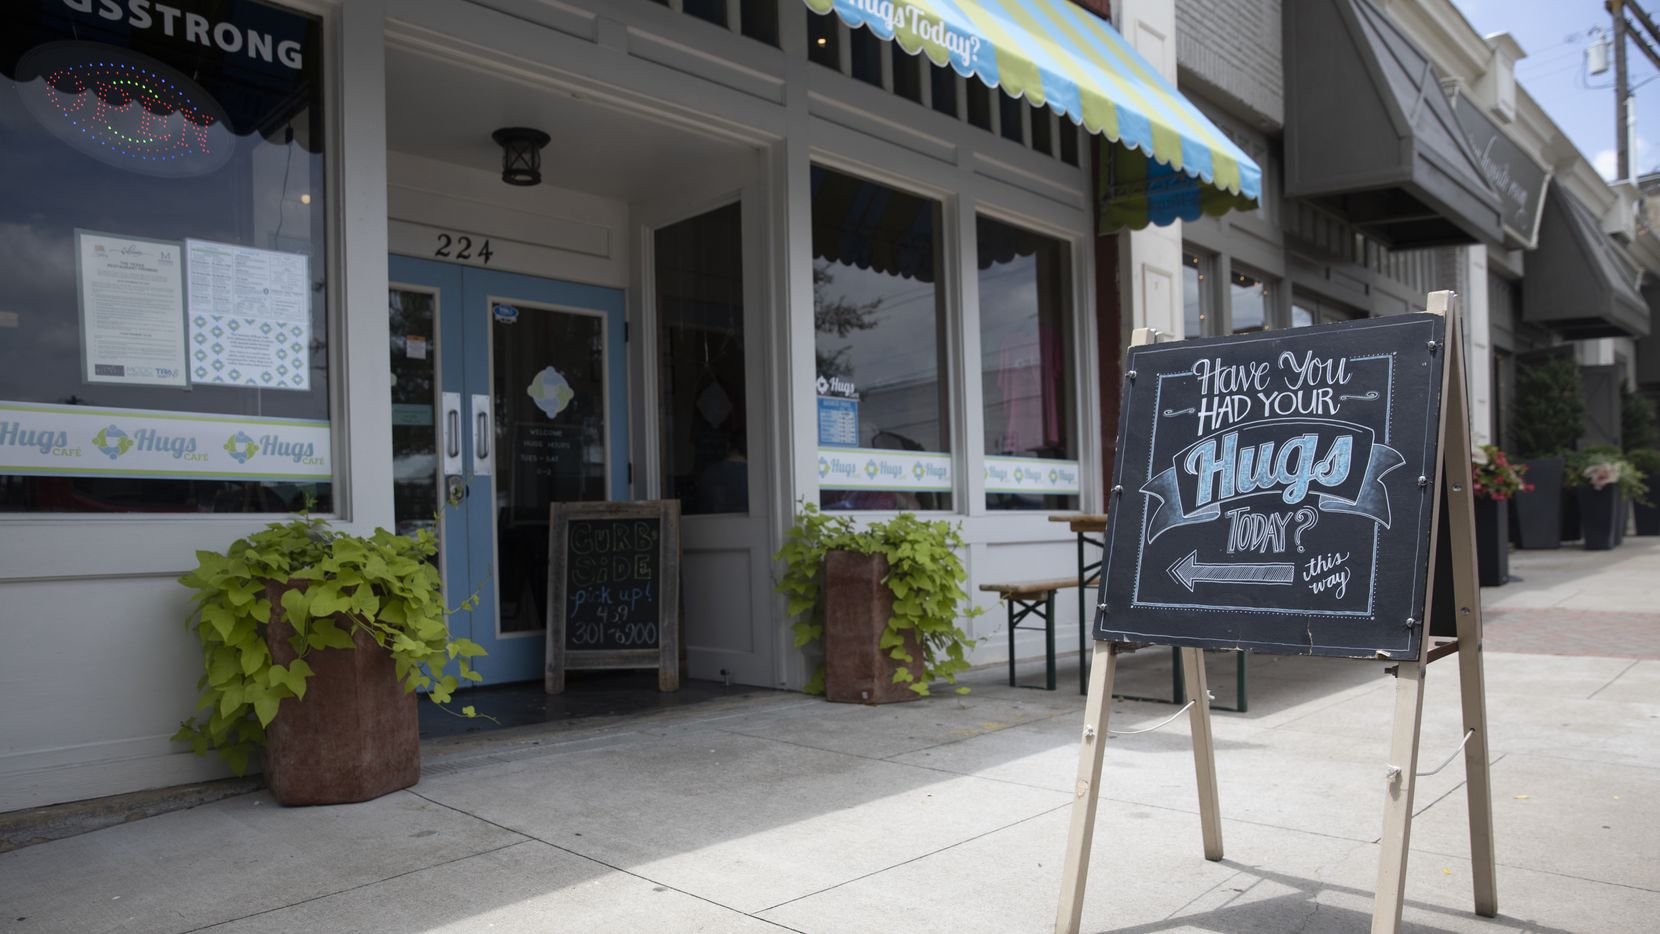 Hugs Café is a popular lunch spot just off the historic square in McKinney.